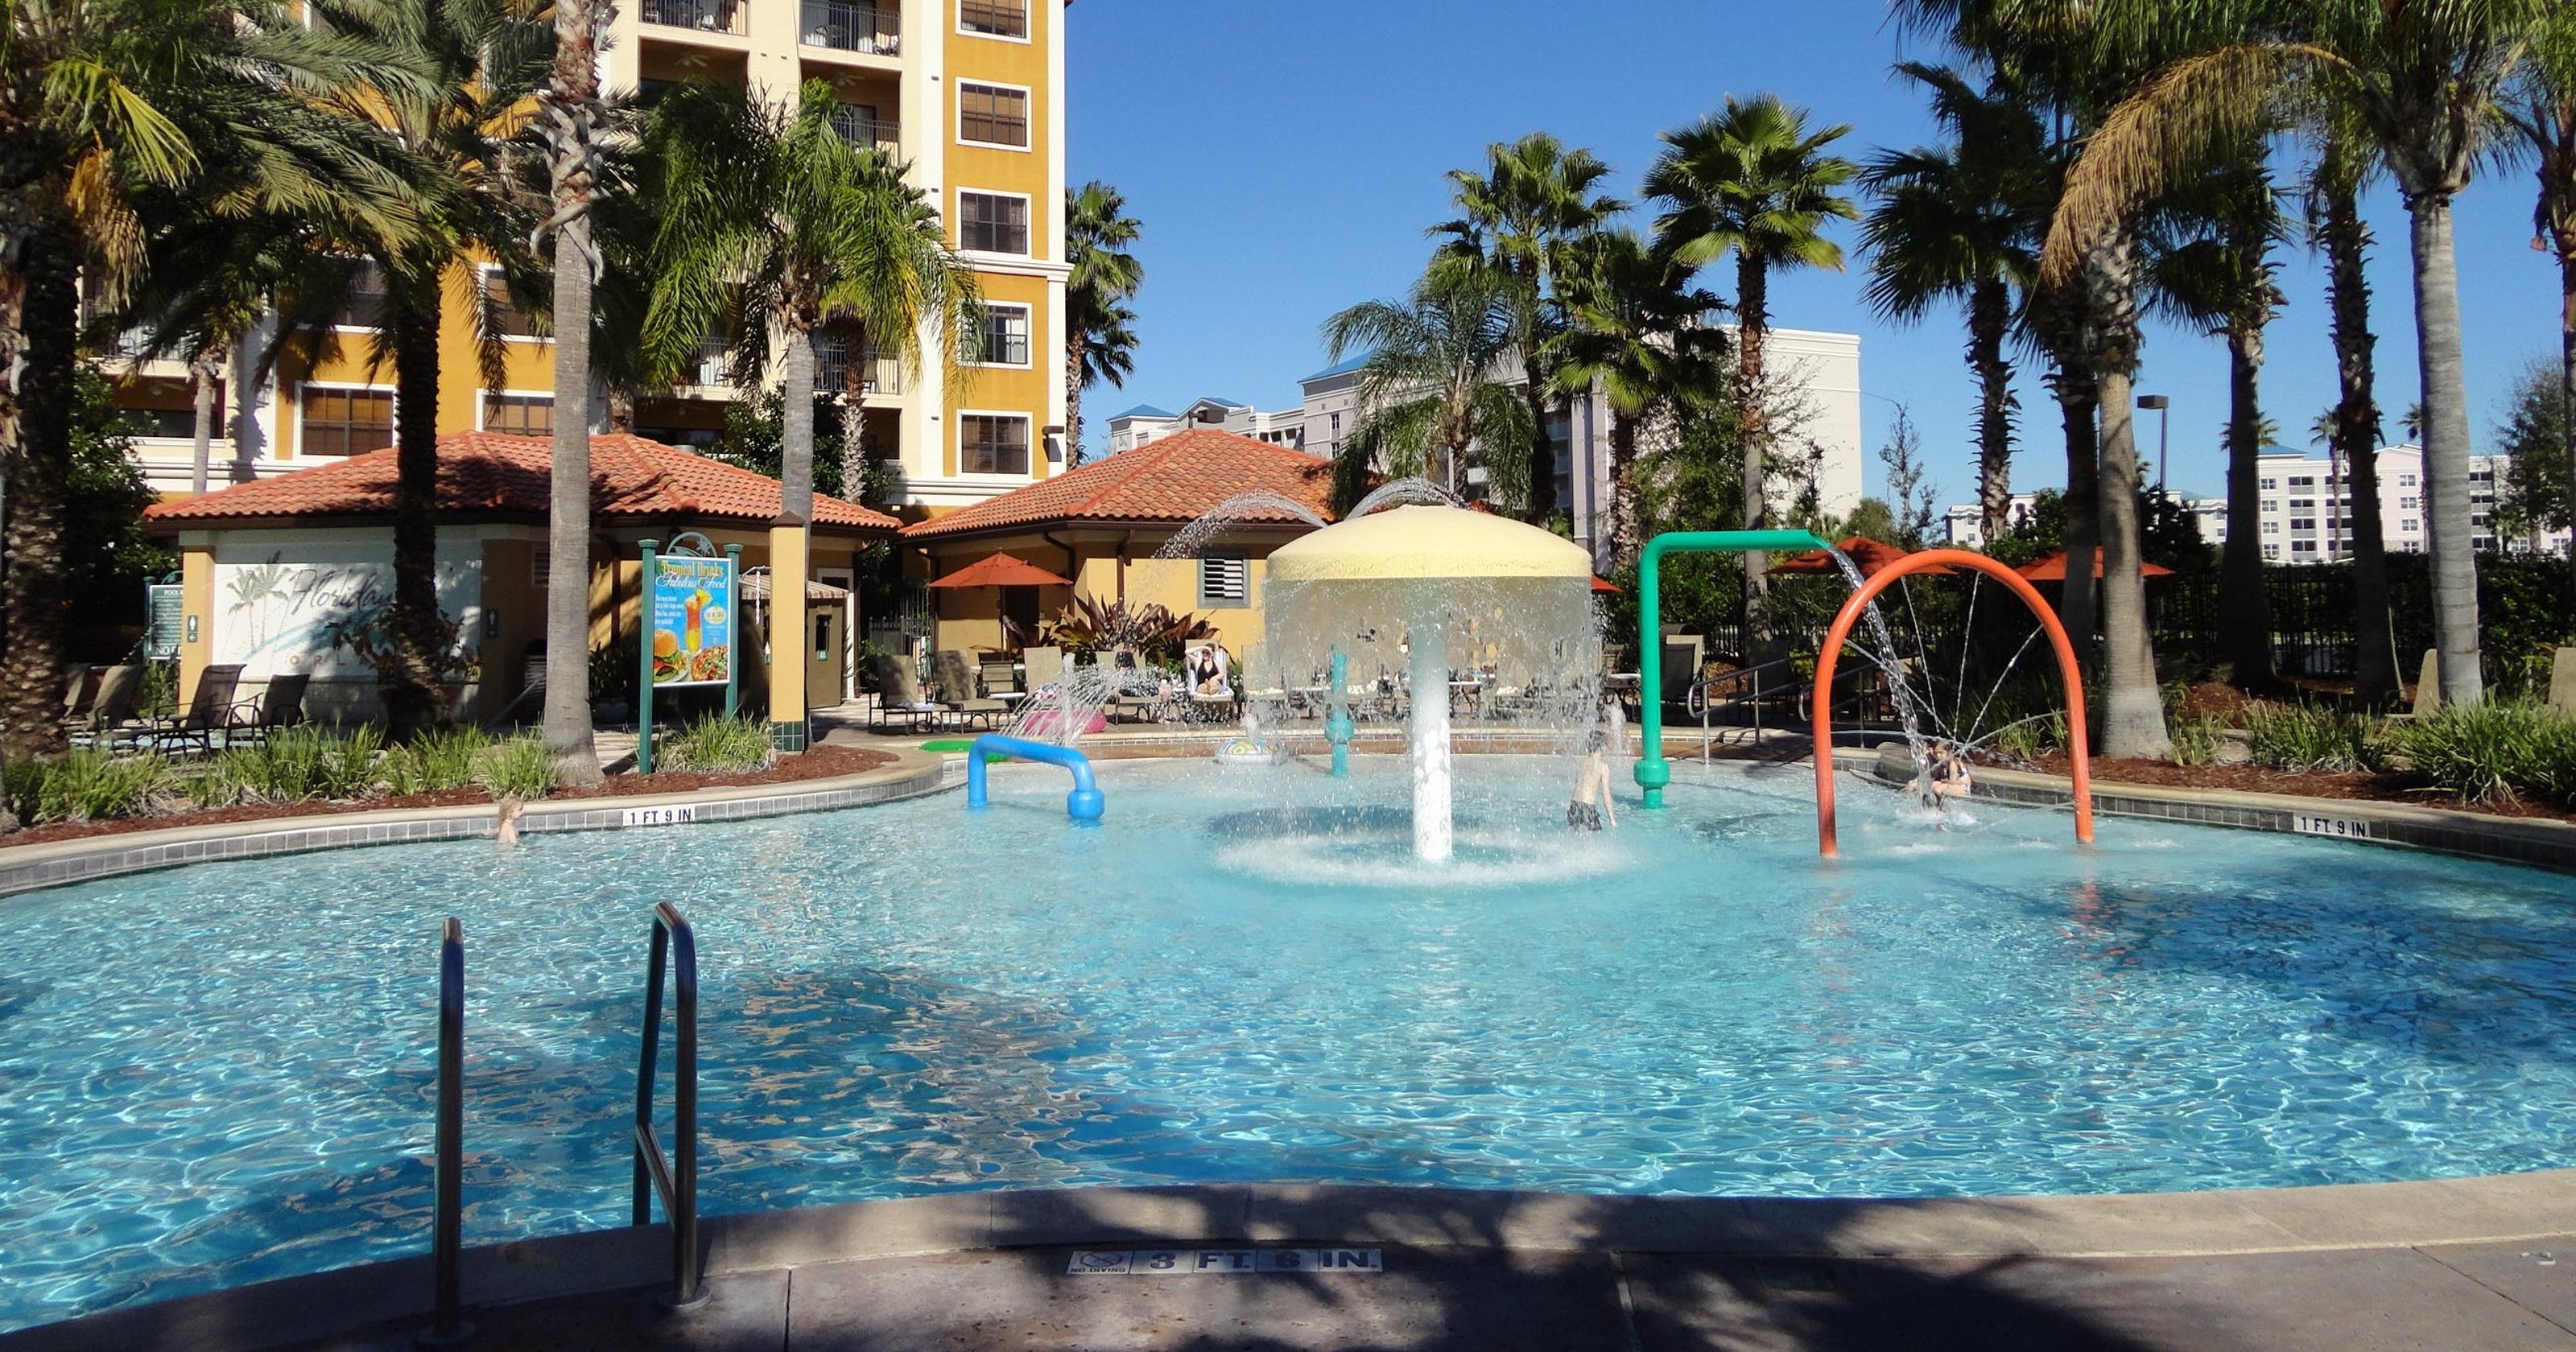 Orlando home to six of top 10 best family hotels